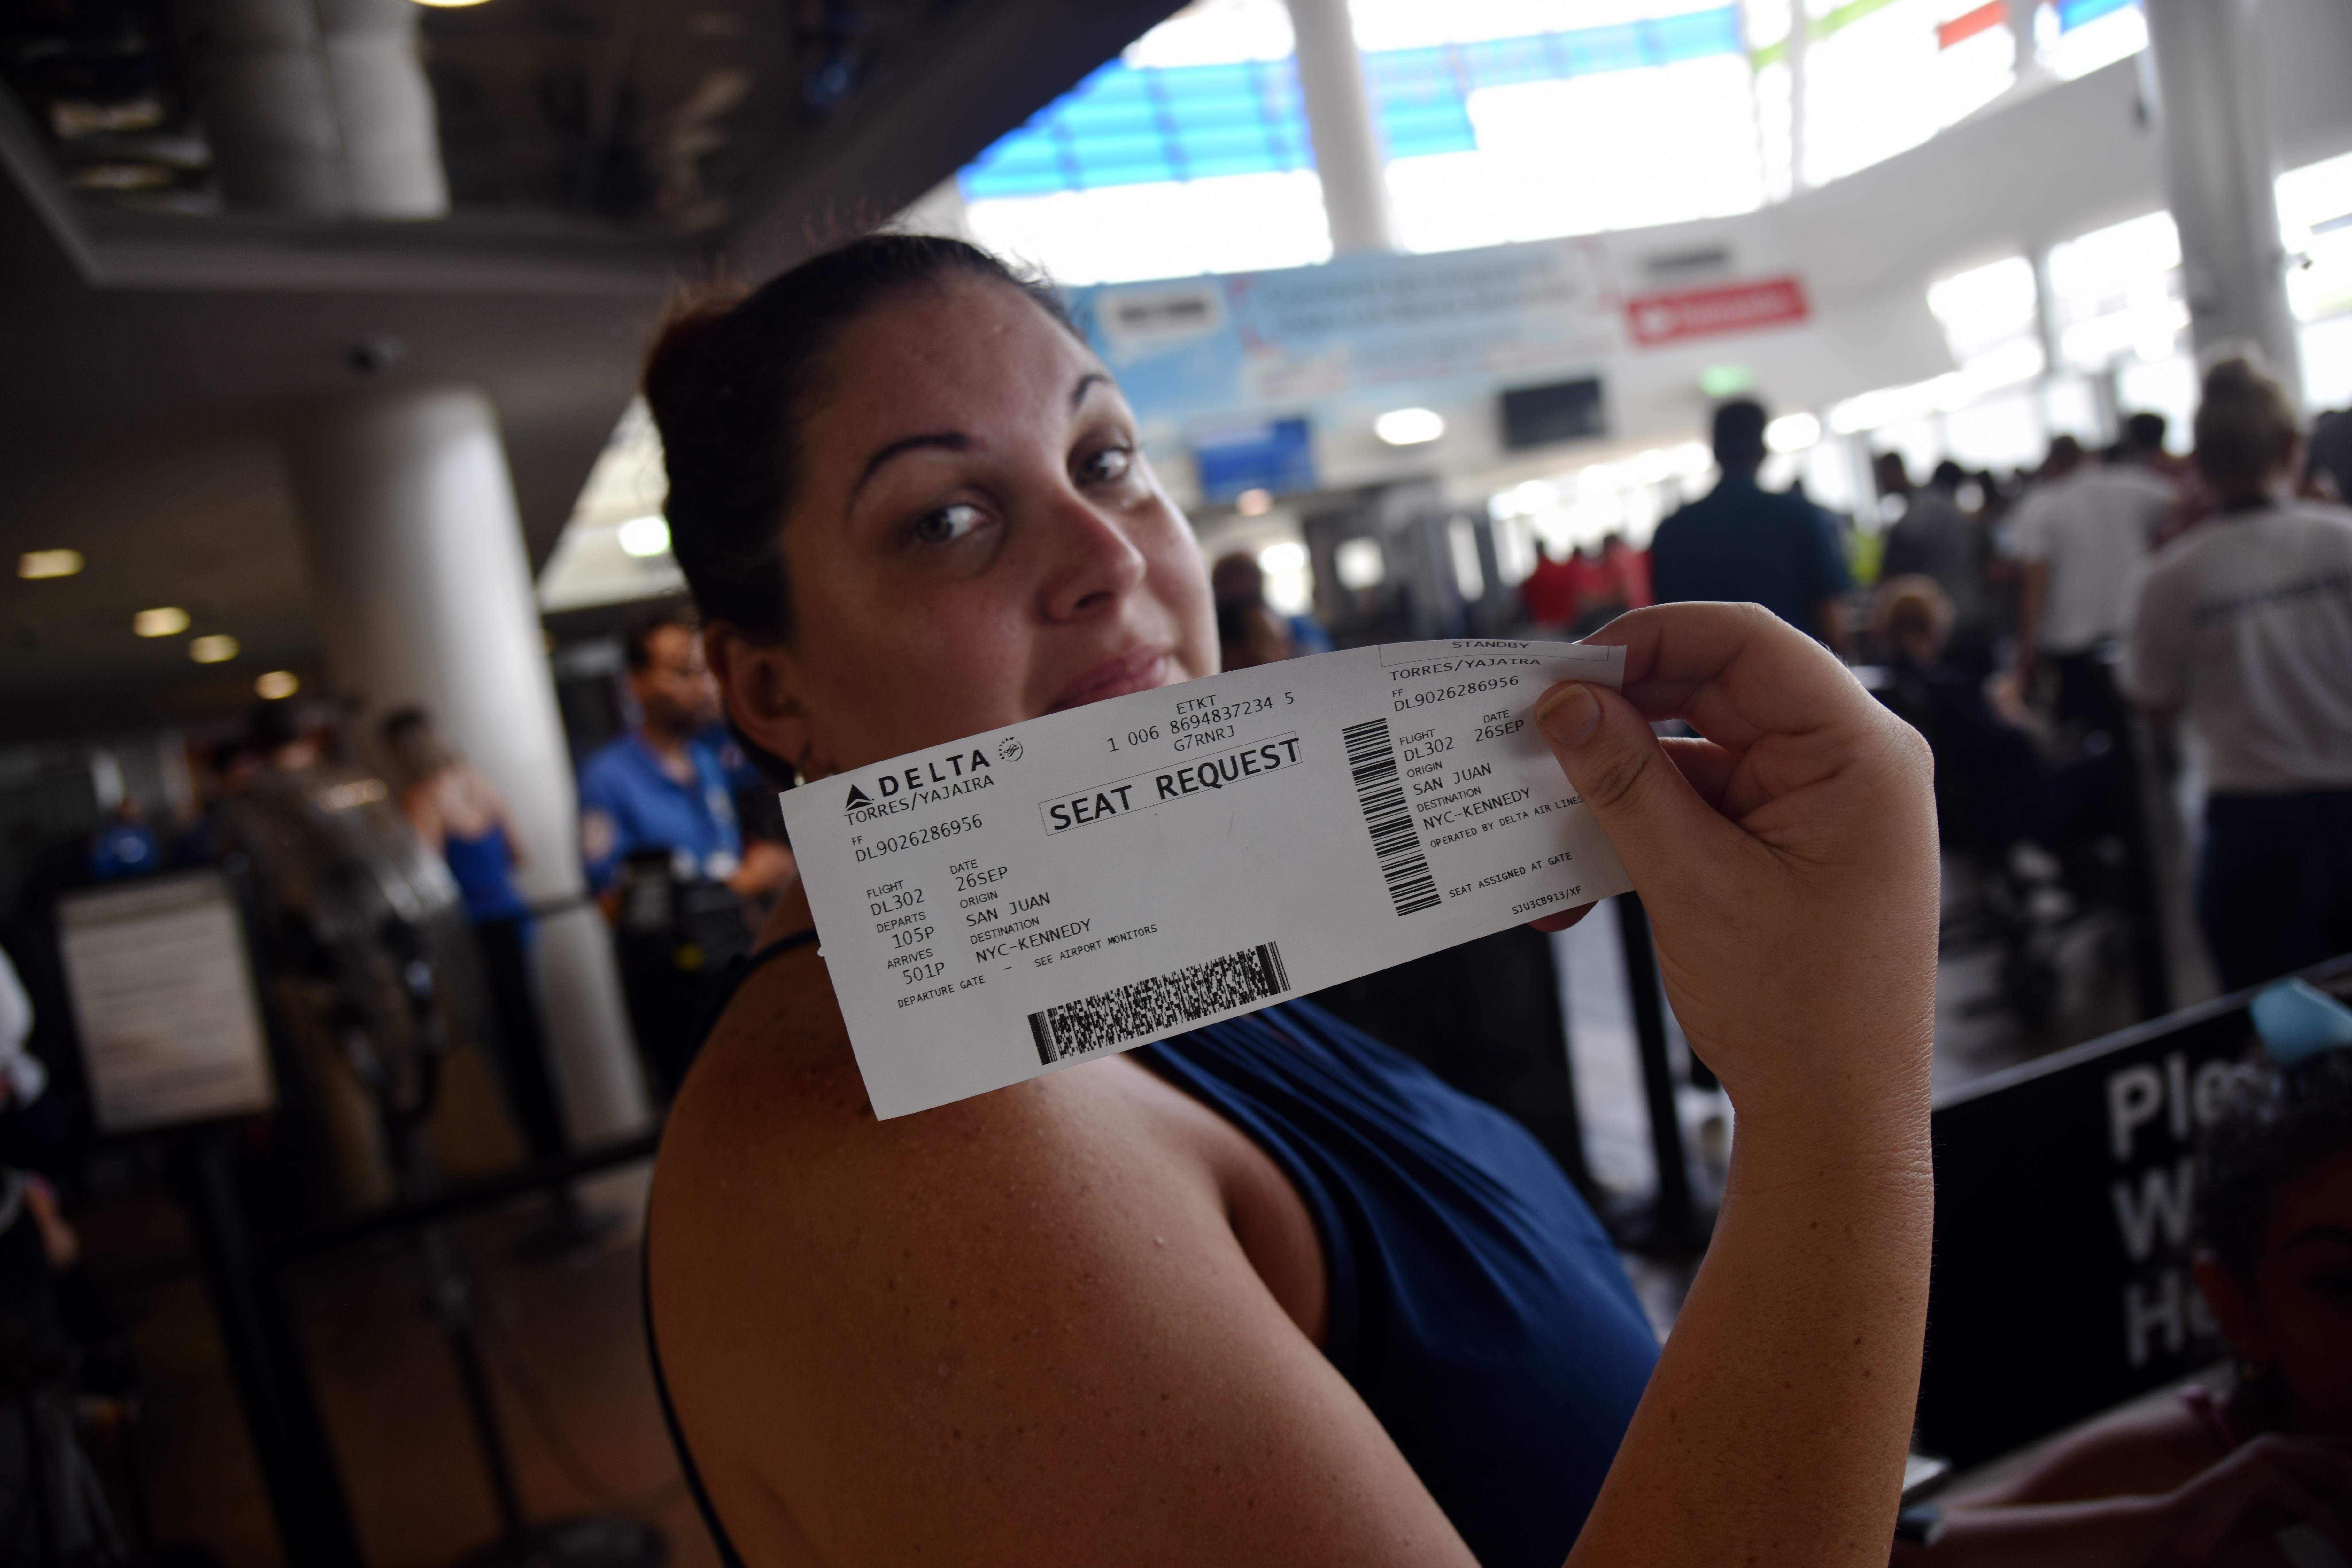 A woman shows her ticket for a seat request while waiting in a line at Luis Munoz Marin International Airport, in San Juan, Puerto Rico, on September 26, 2017, as some flights are still being rescheduled for one or two weeks. 
The US island territory, working without electricity, is struggling to dig out and clean up from its disastrous brush with the hurricane, blamed for at least 33 deaths across the Caribbean. / AFP PHOTO / HECTOR RETAMAL        (Photo credit should read HECTOR RETAMAL/AFP/Getty Images)